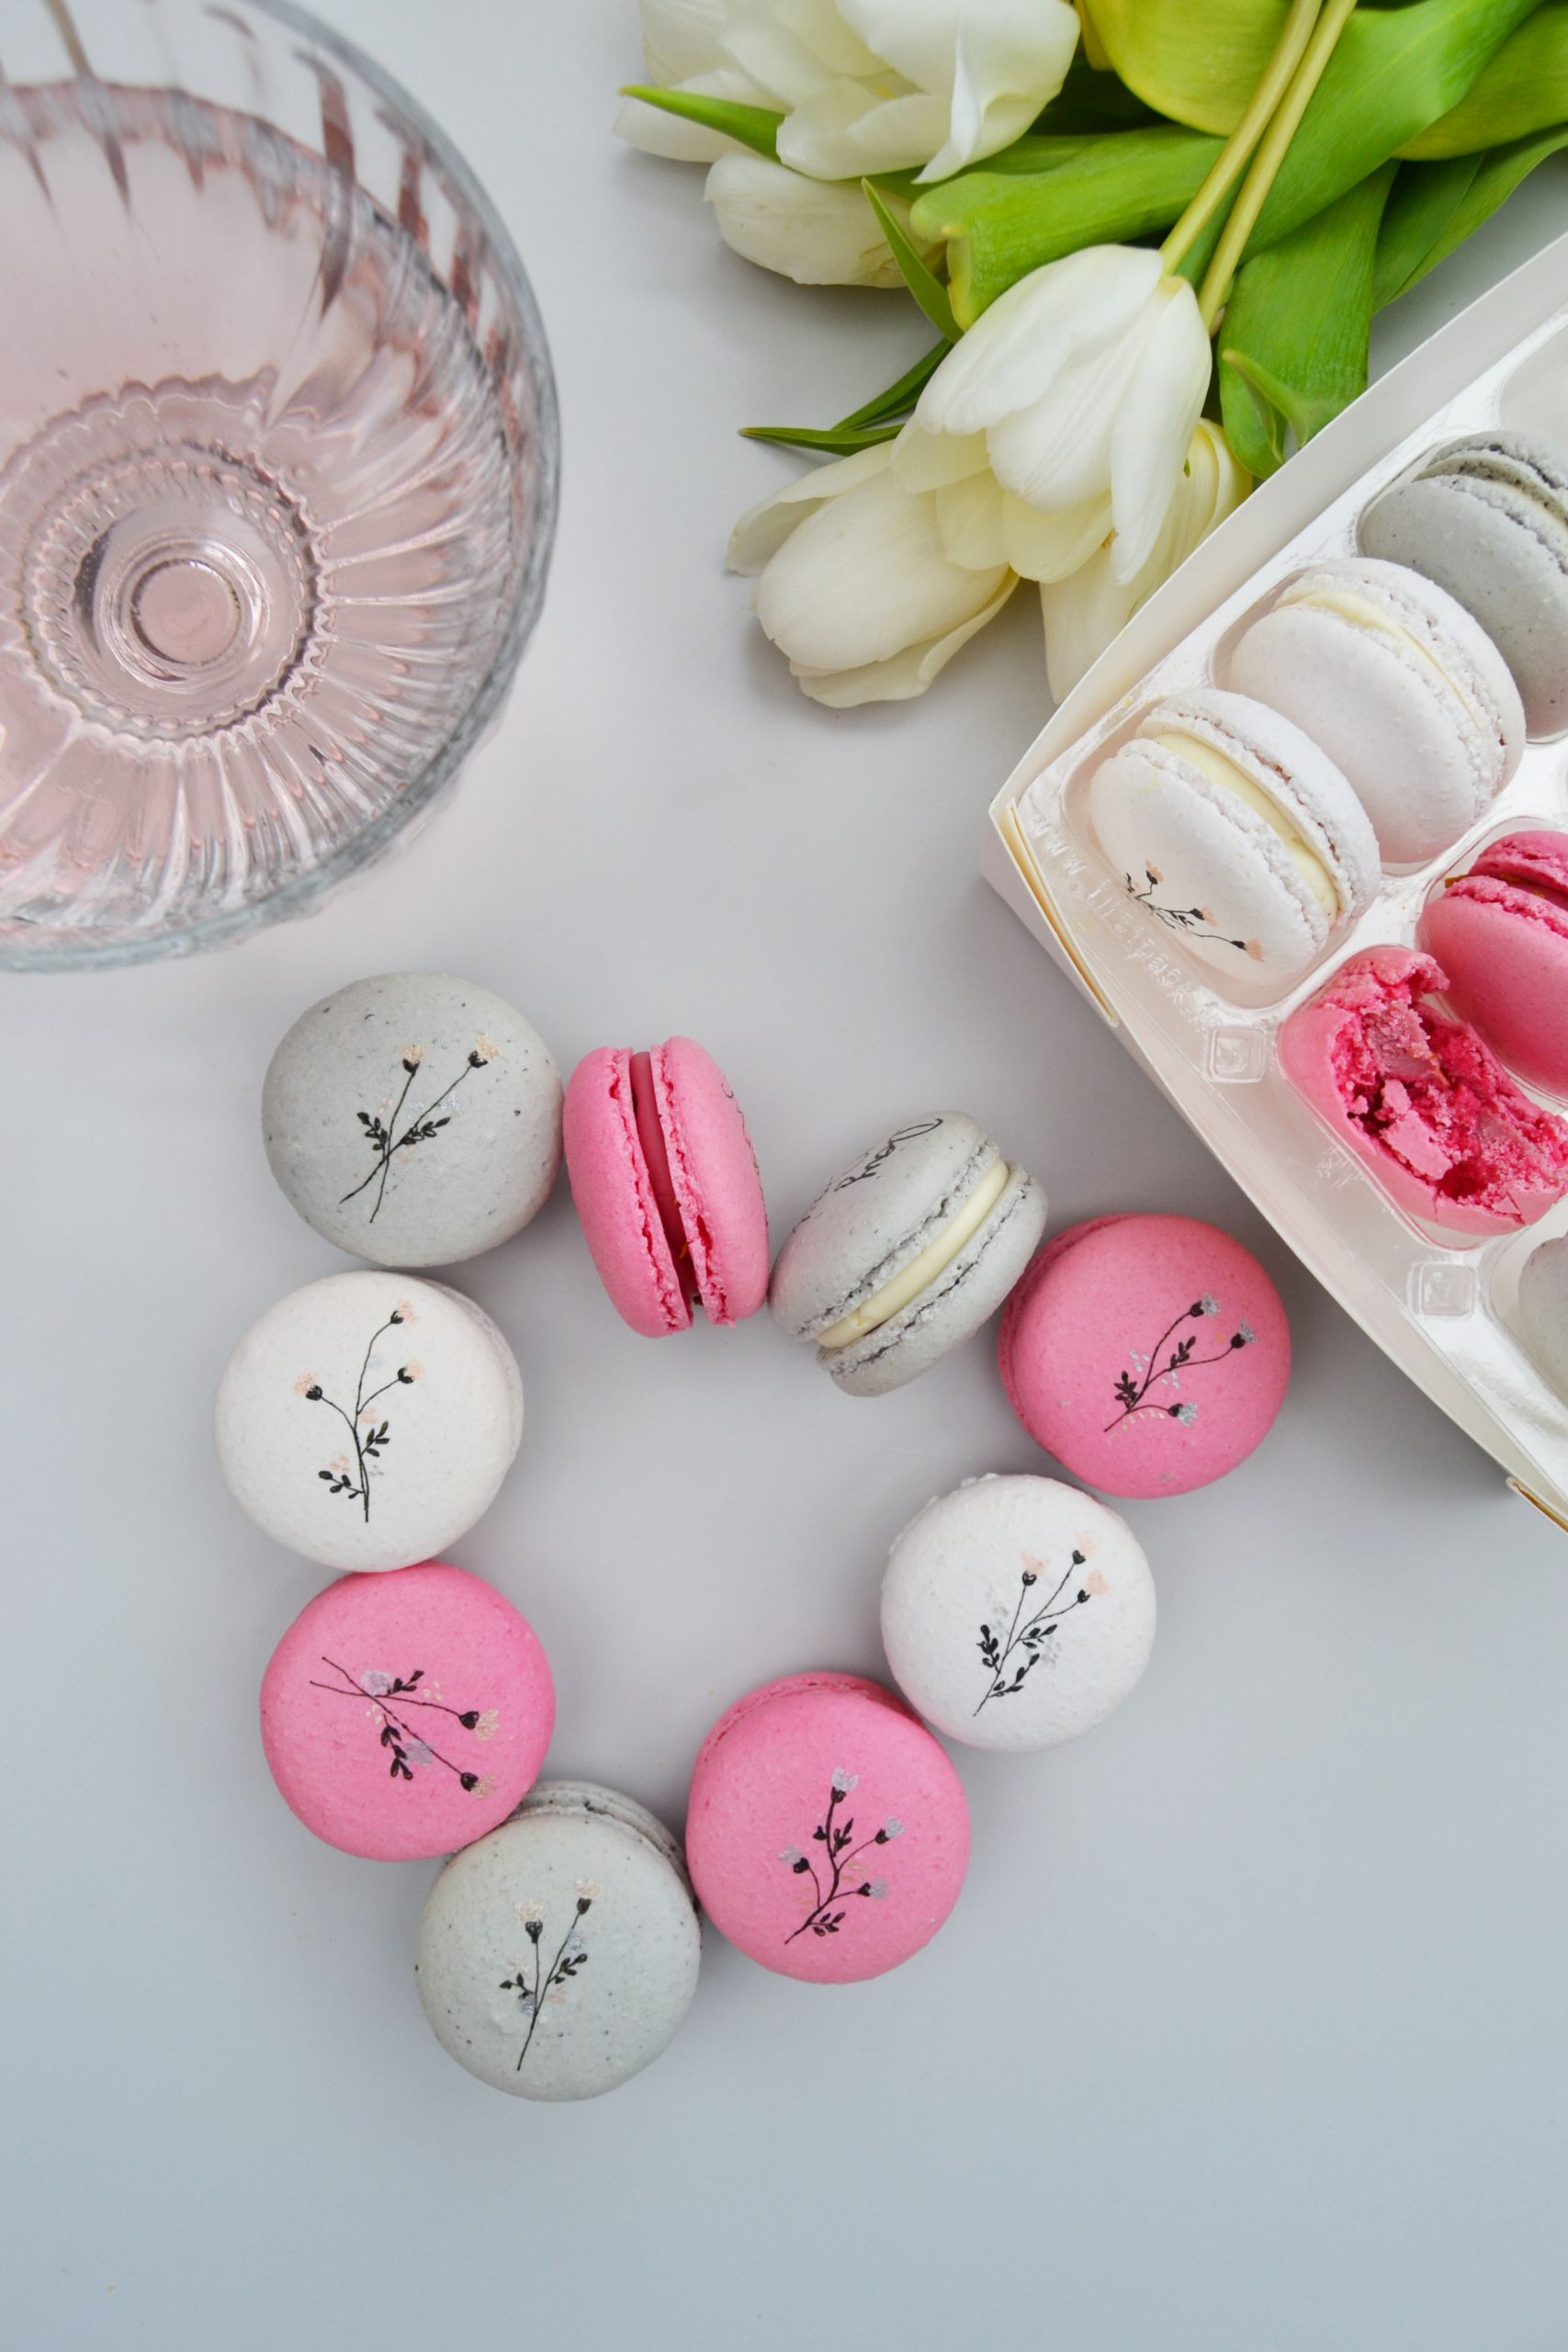 MOTHER’S DAY FRENCH MACARONS